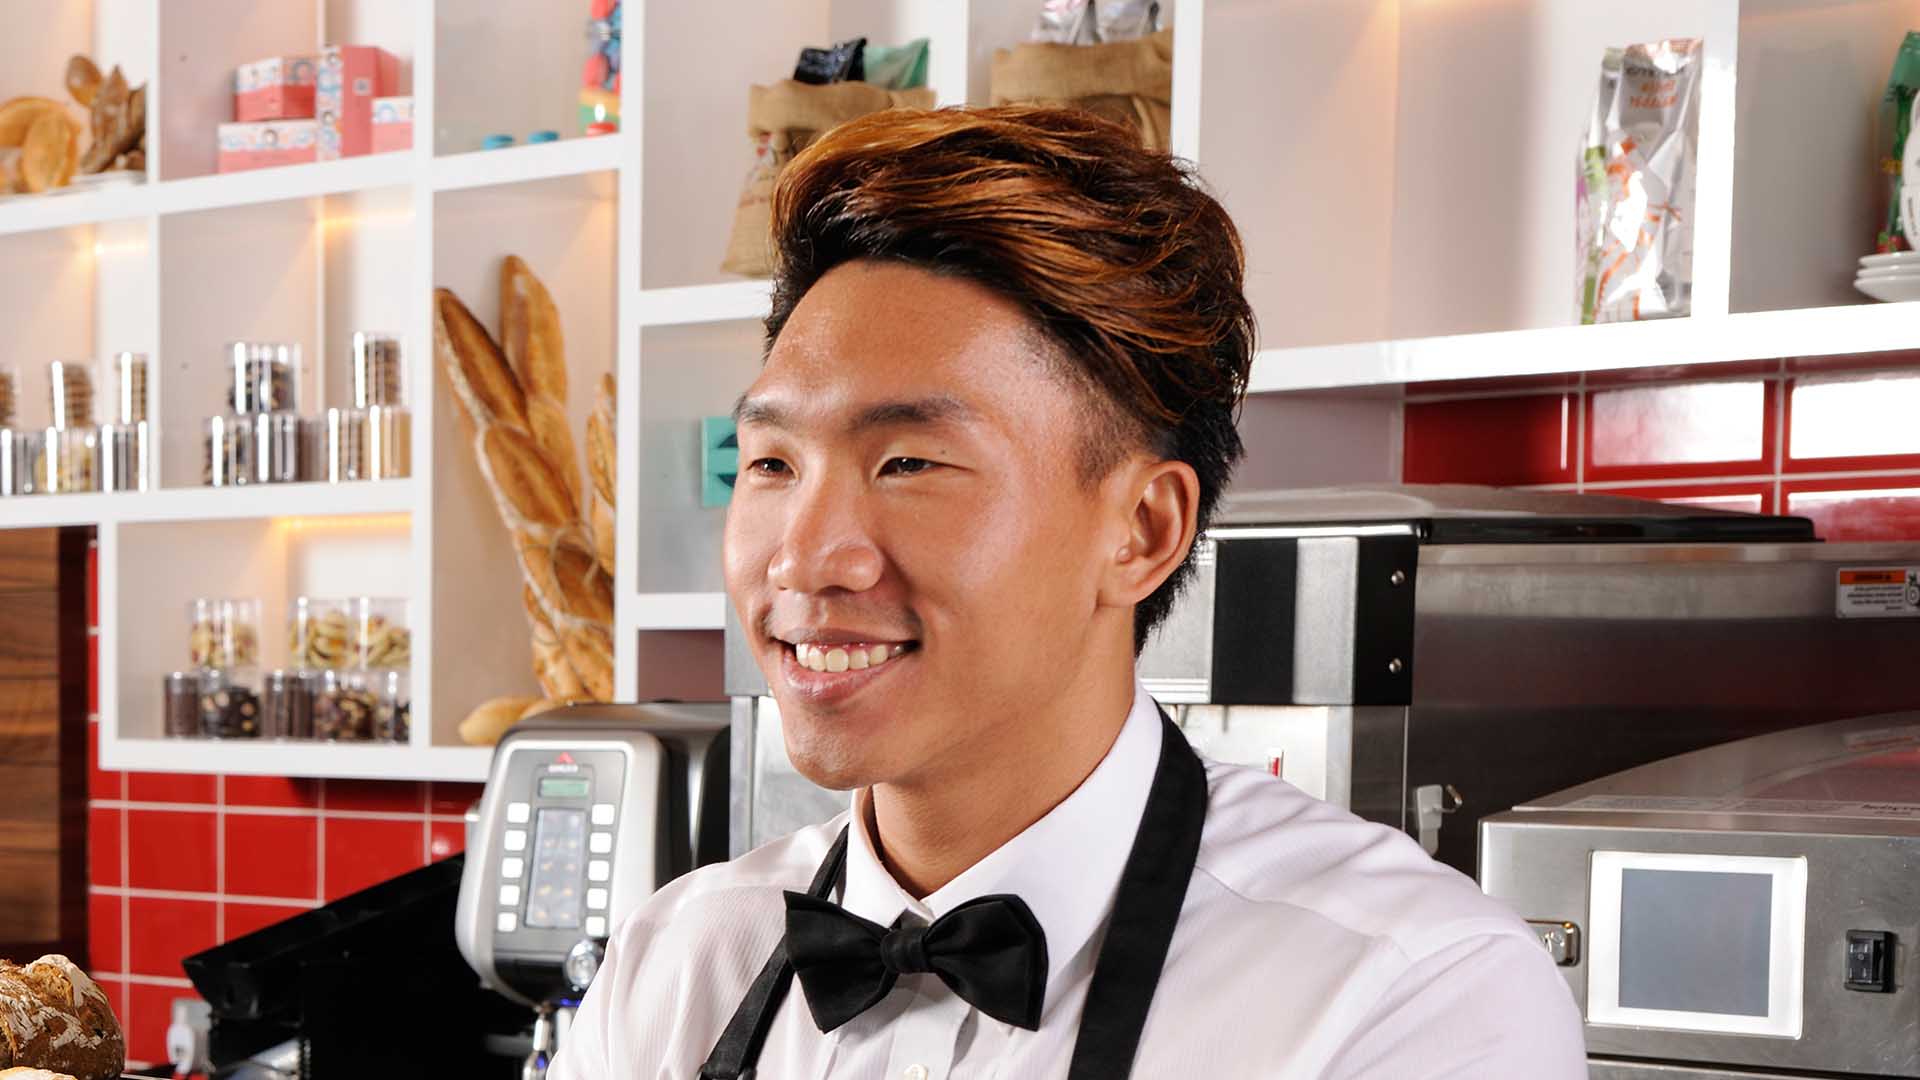 A Smiling Trainee in F&B